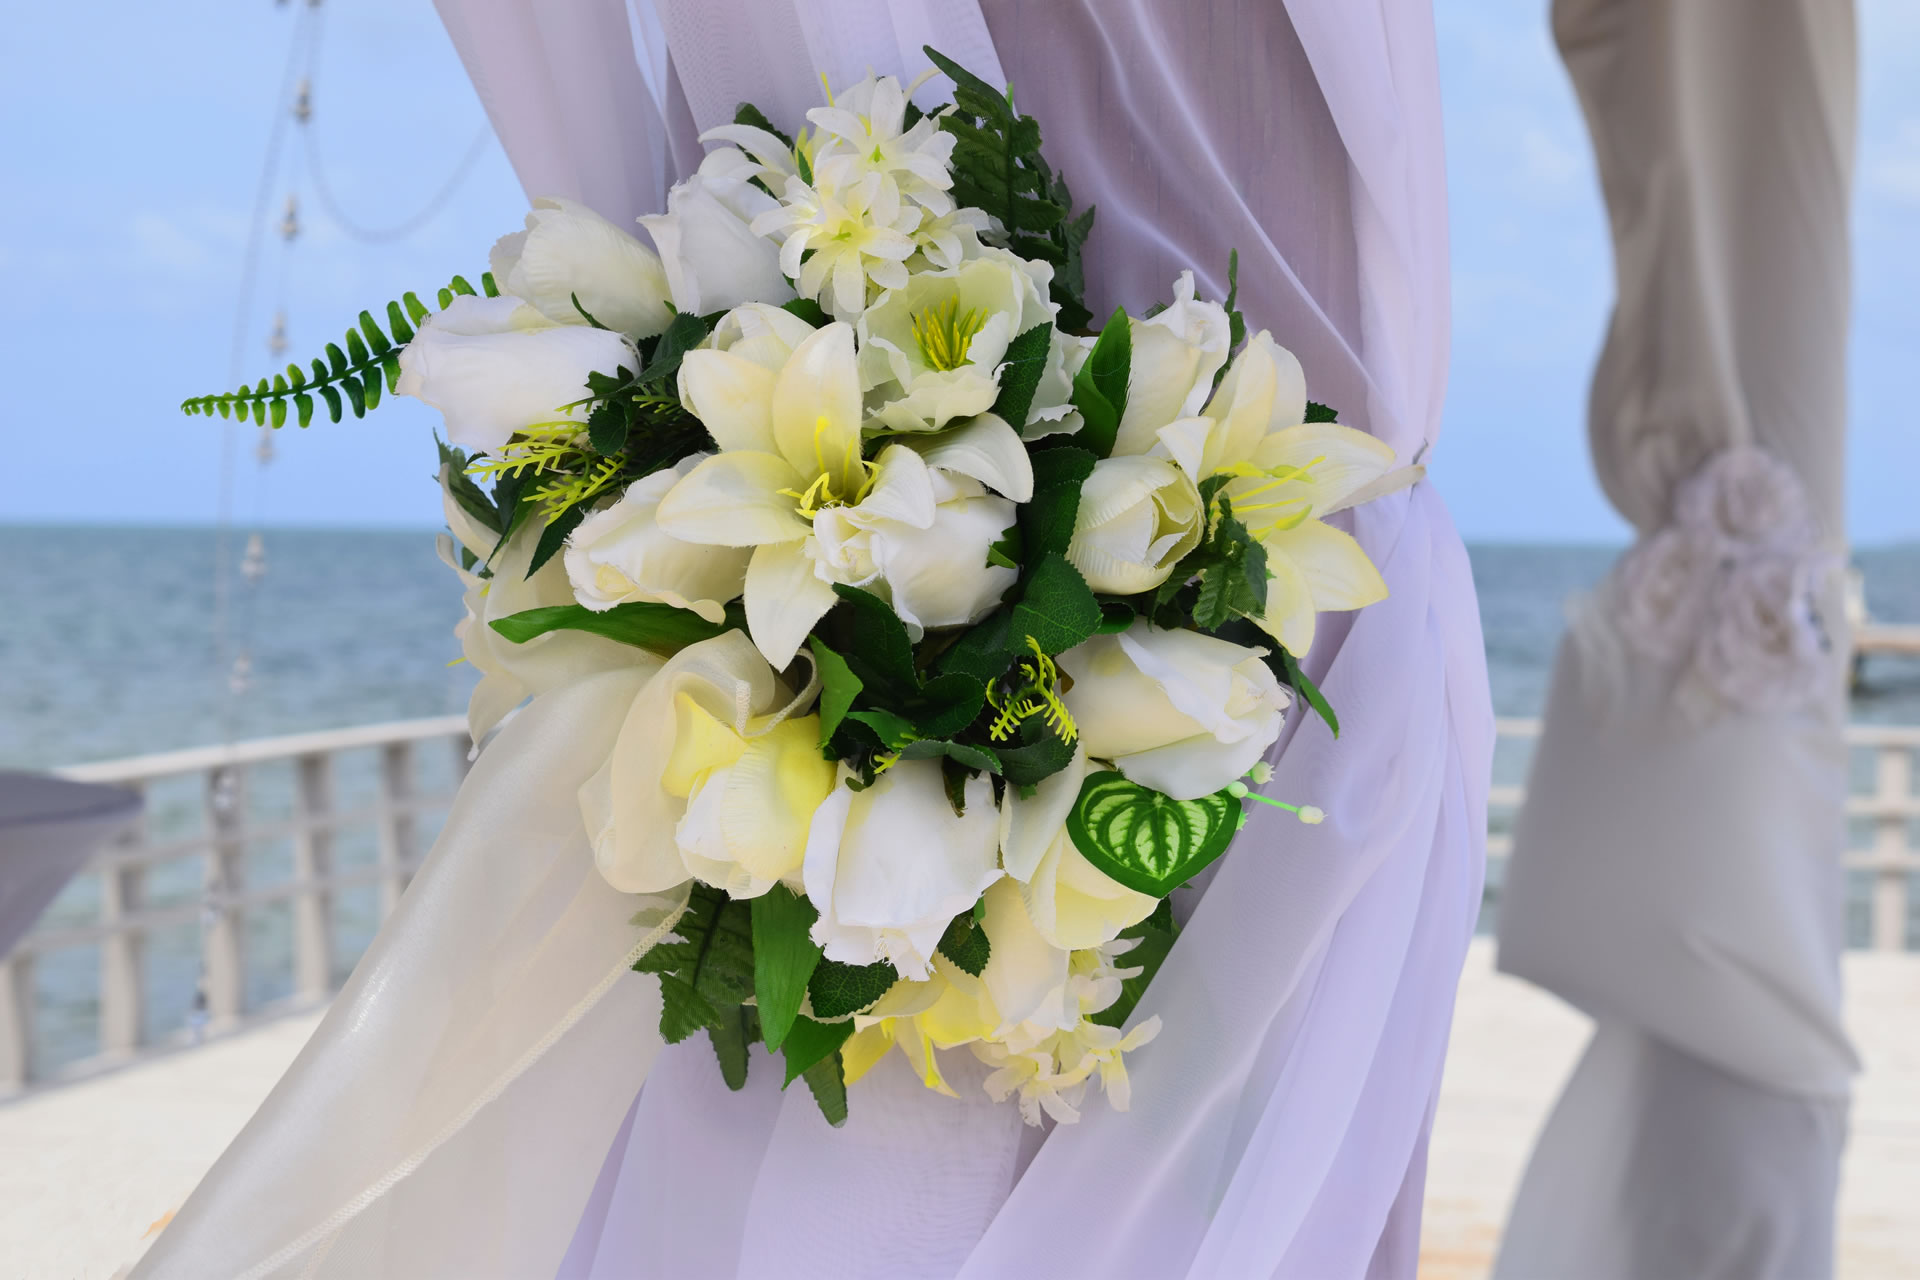 A bouquet of white flowers for a wedding ceremony.